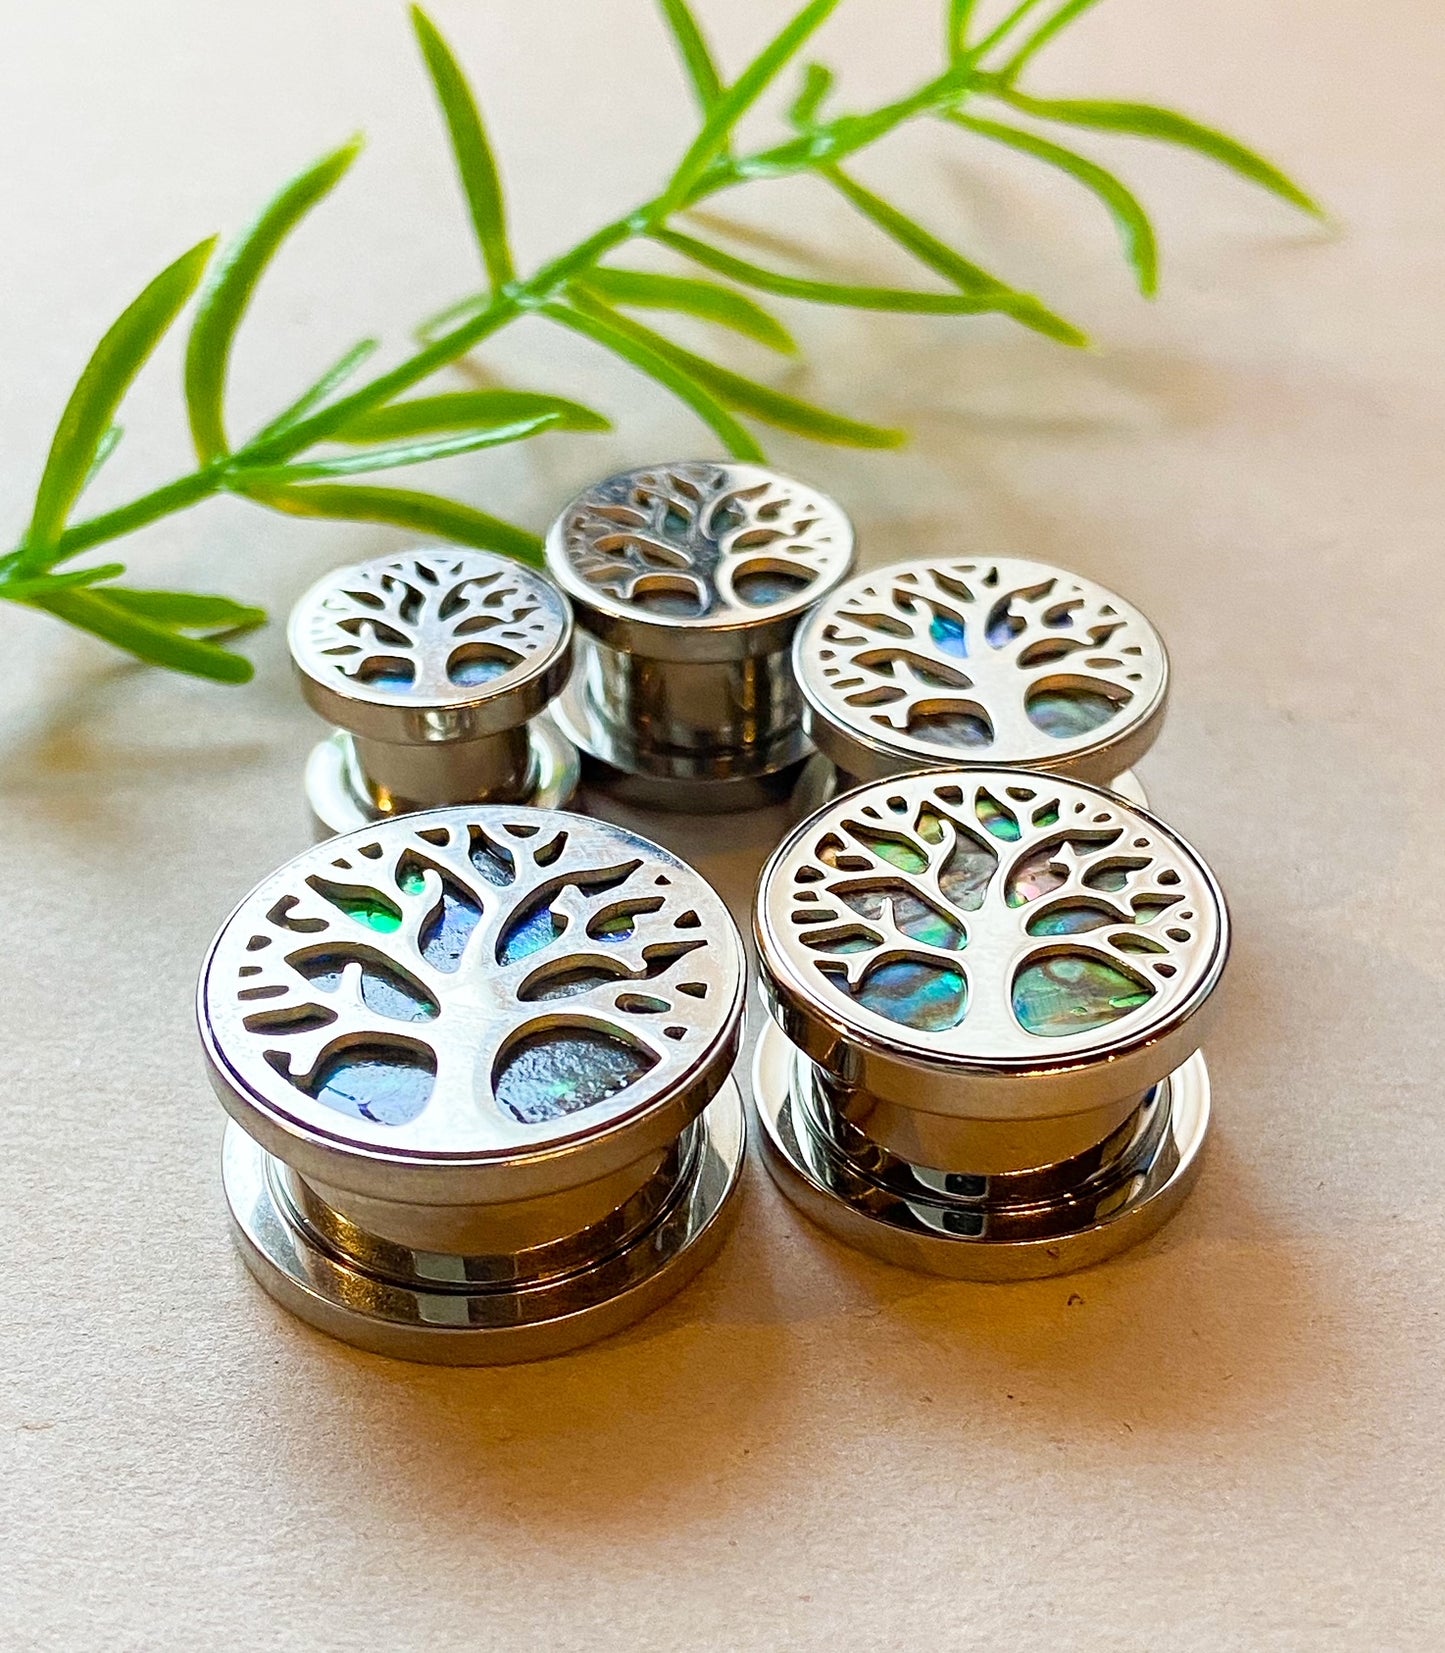 PAIR of Stunning Abalone Inlay Tree of Life Steel Screw Fit Tunnels - Gauges 0g (8mm) thru 5/8" (16mm) available!